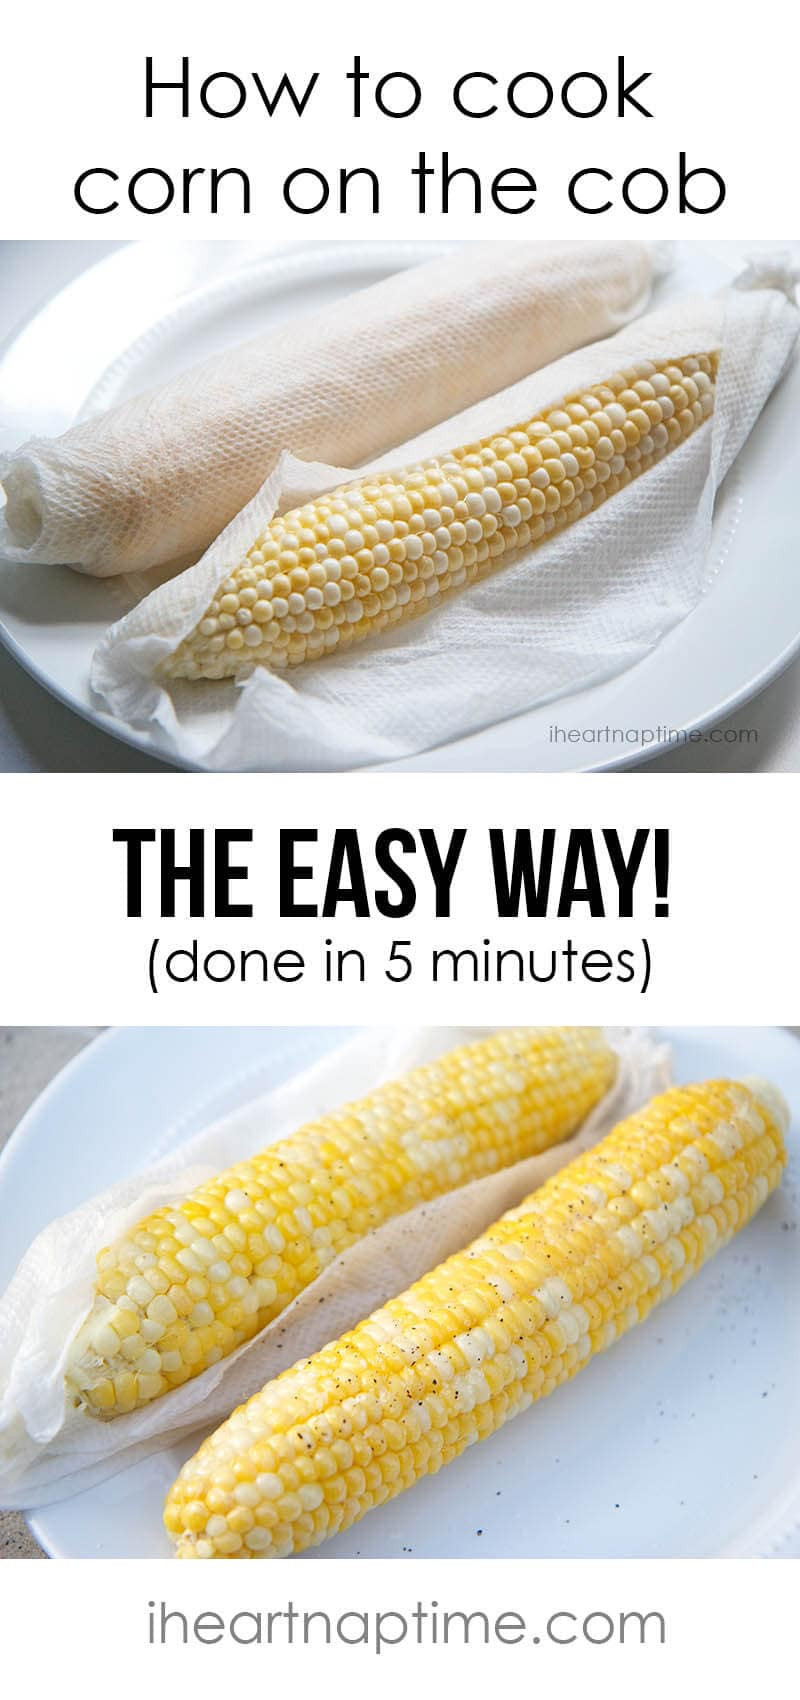 Corn On The Cob In Microwave
 20 household tips to make your life easier I Heart Nap Time